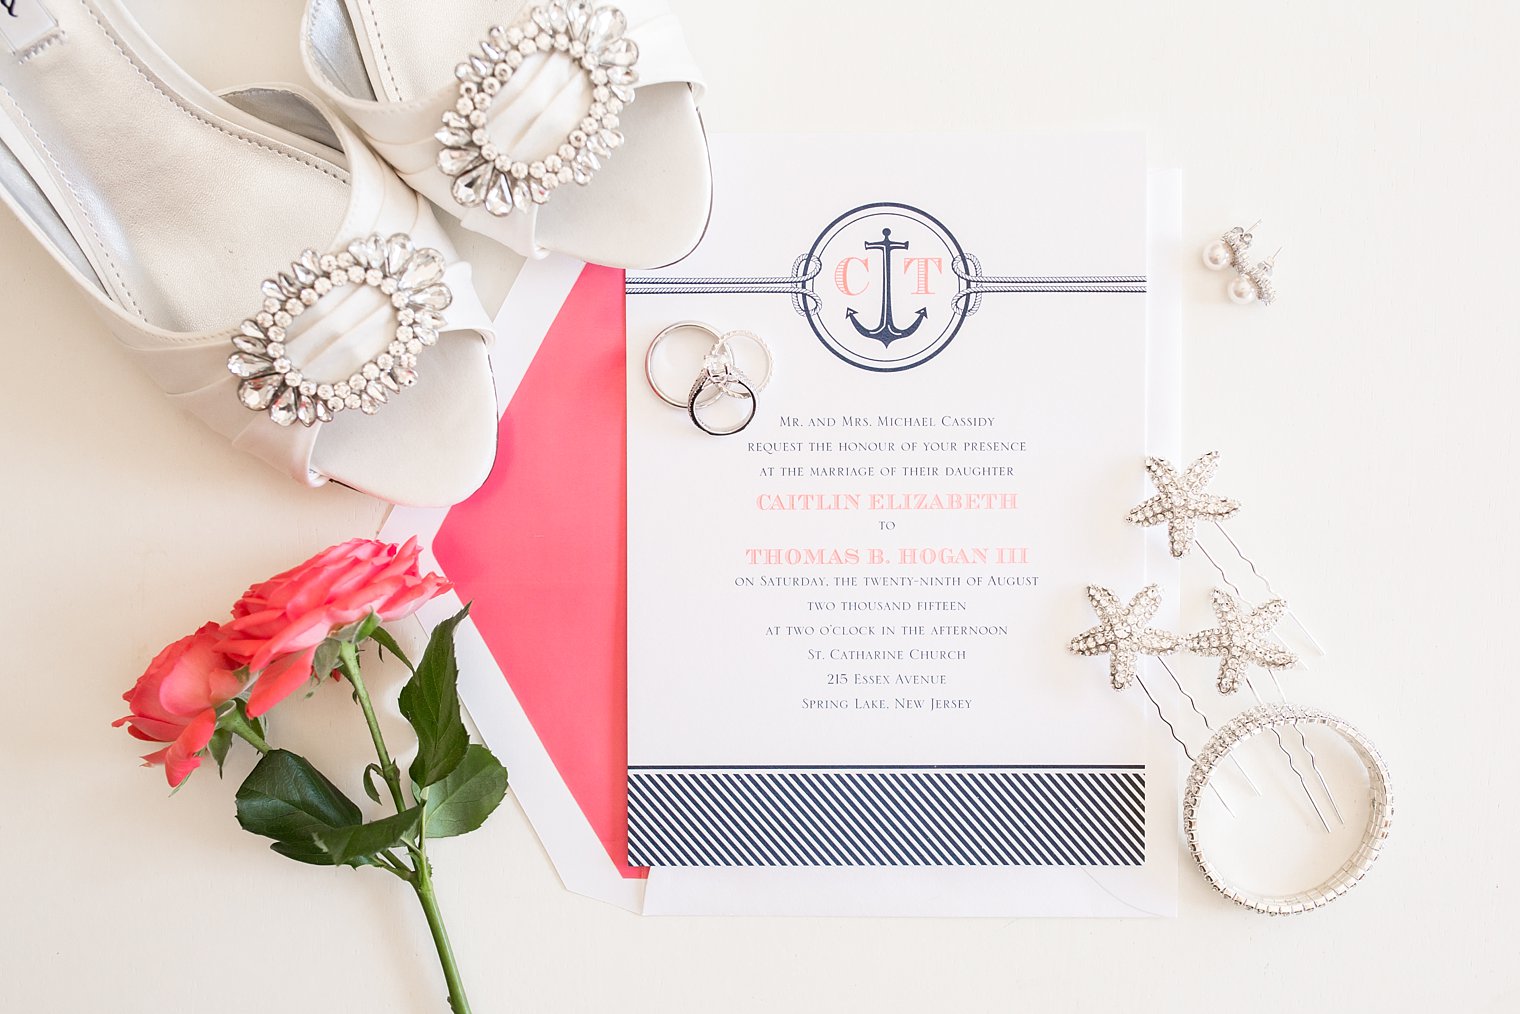 Carlson Craft Invitation | The Papery